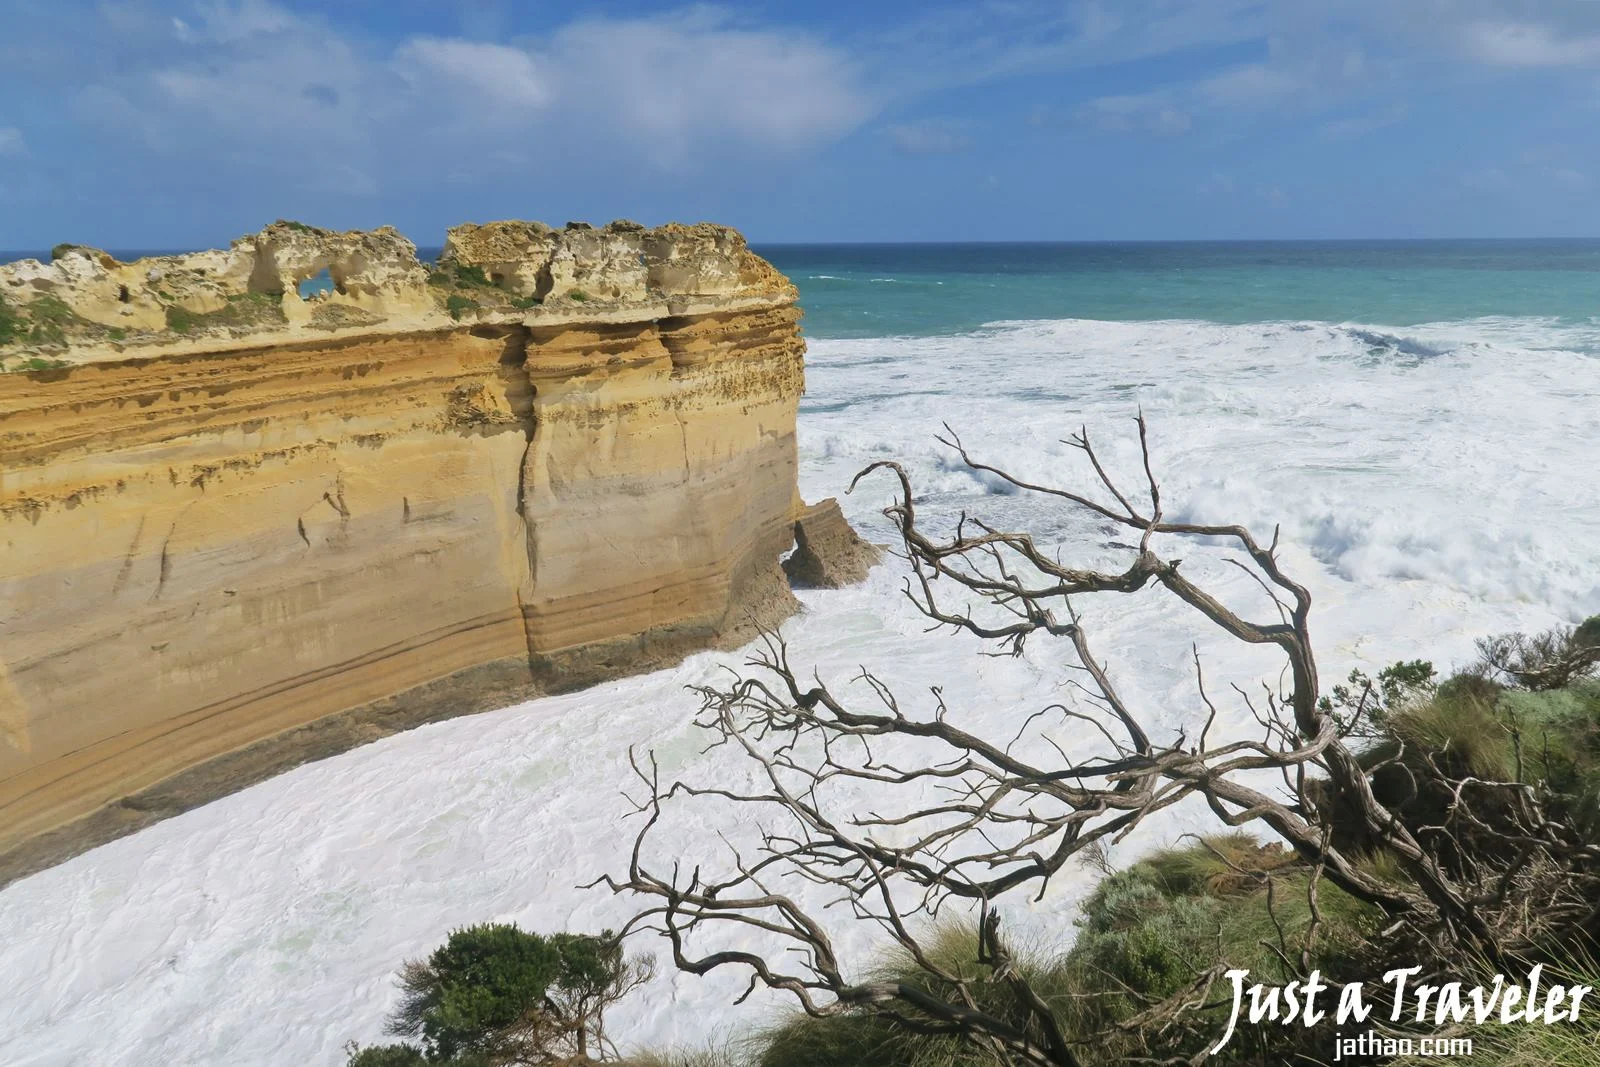 Victoria-Melbourne-Great-Ocean-Road-tour-accommodation-resort-itinerary-drive-day-trip-12 apostles-holiday-things to do great ocean road-Australia